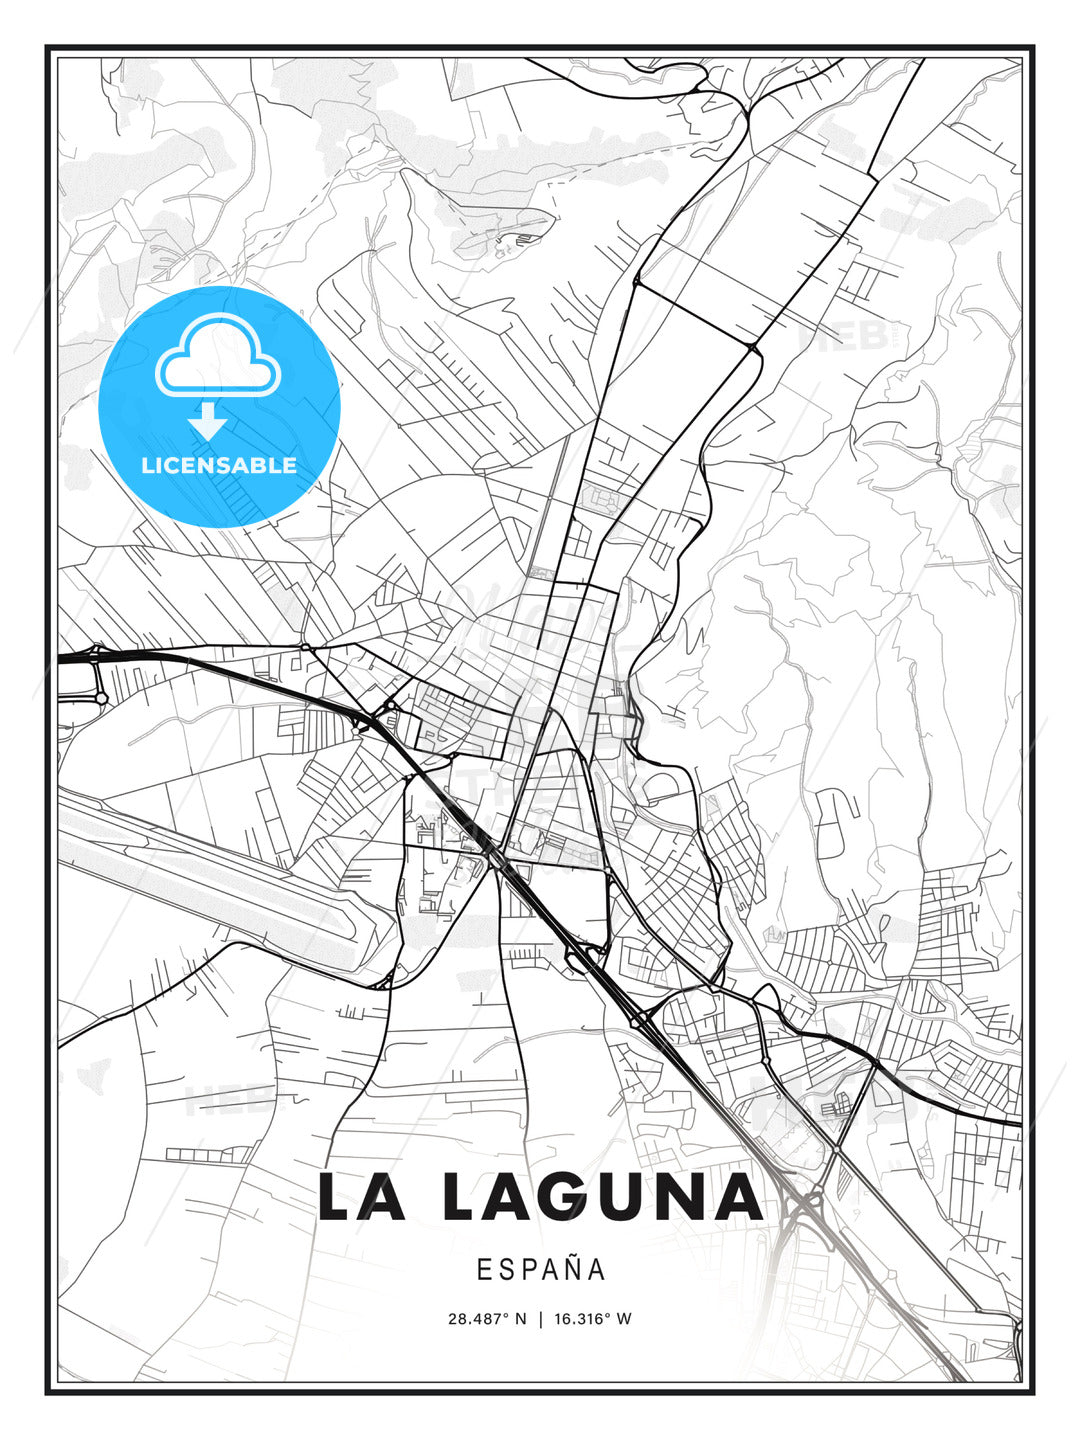 La Laguna, Spain, Modern Print Template in Various Formats - HEBSTREITS Sketches